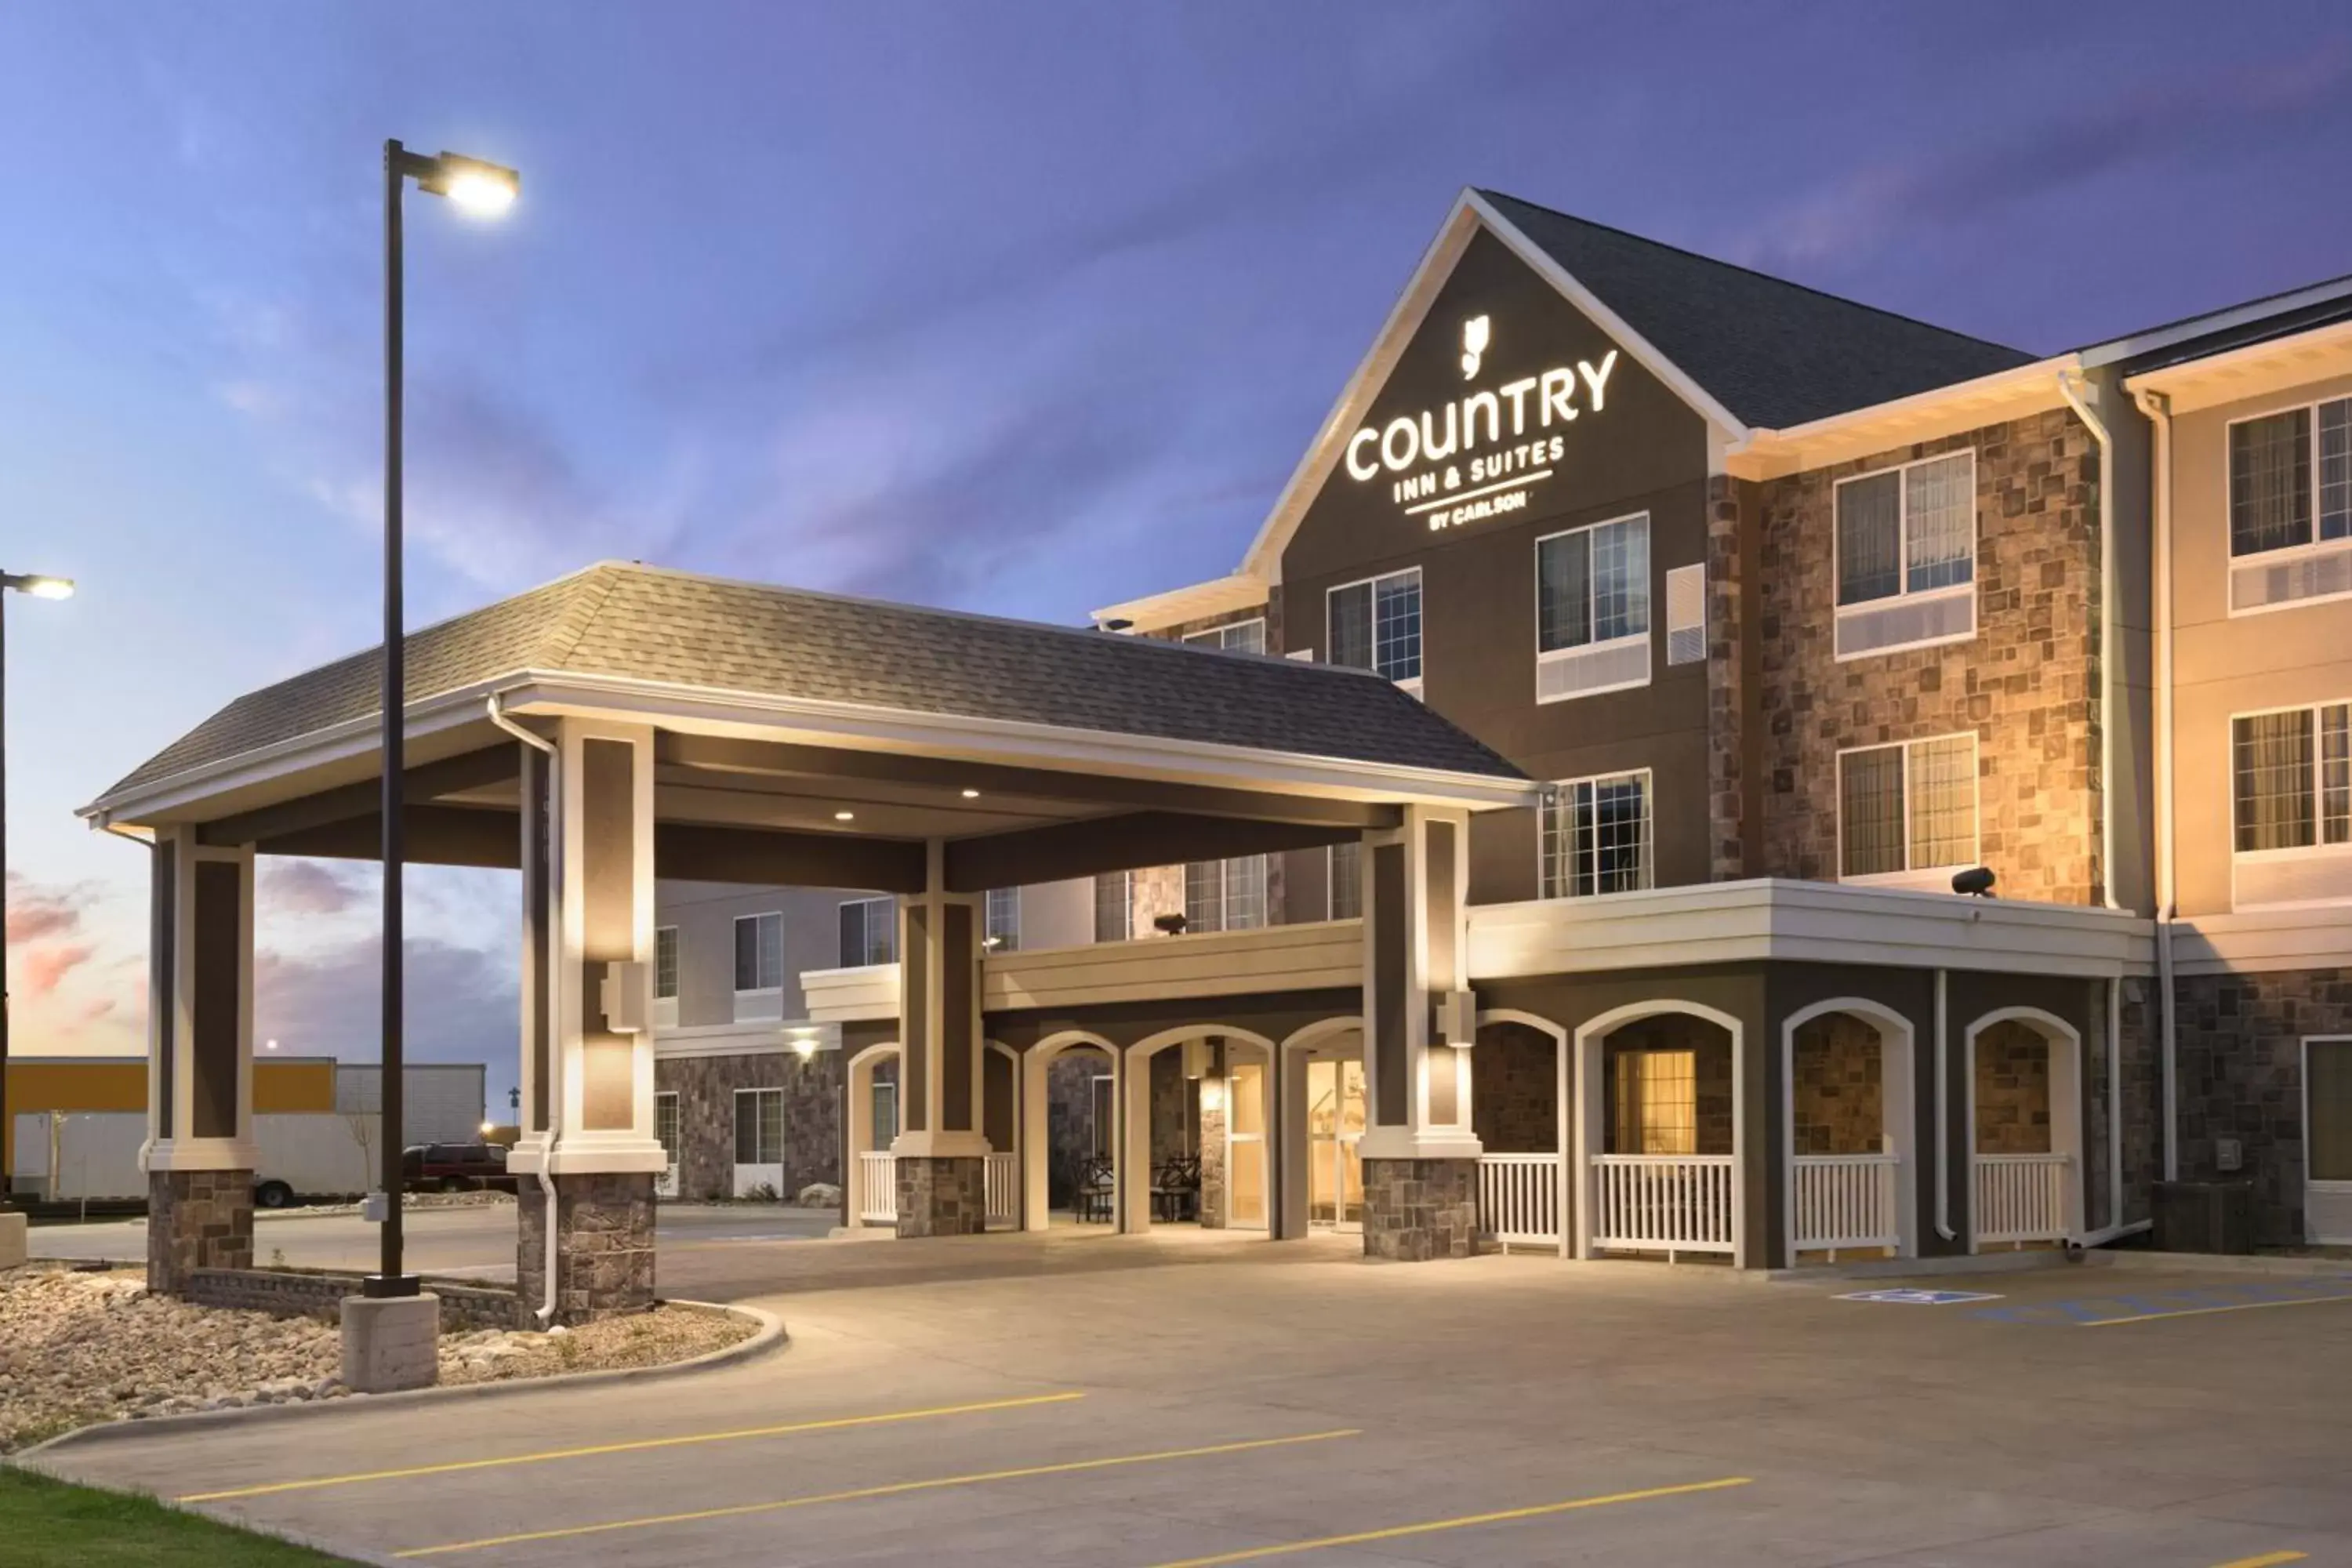 Property Building in Country Inn & Suites by Radisson, Minot, ND